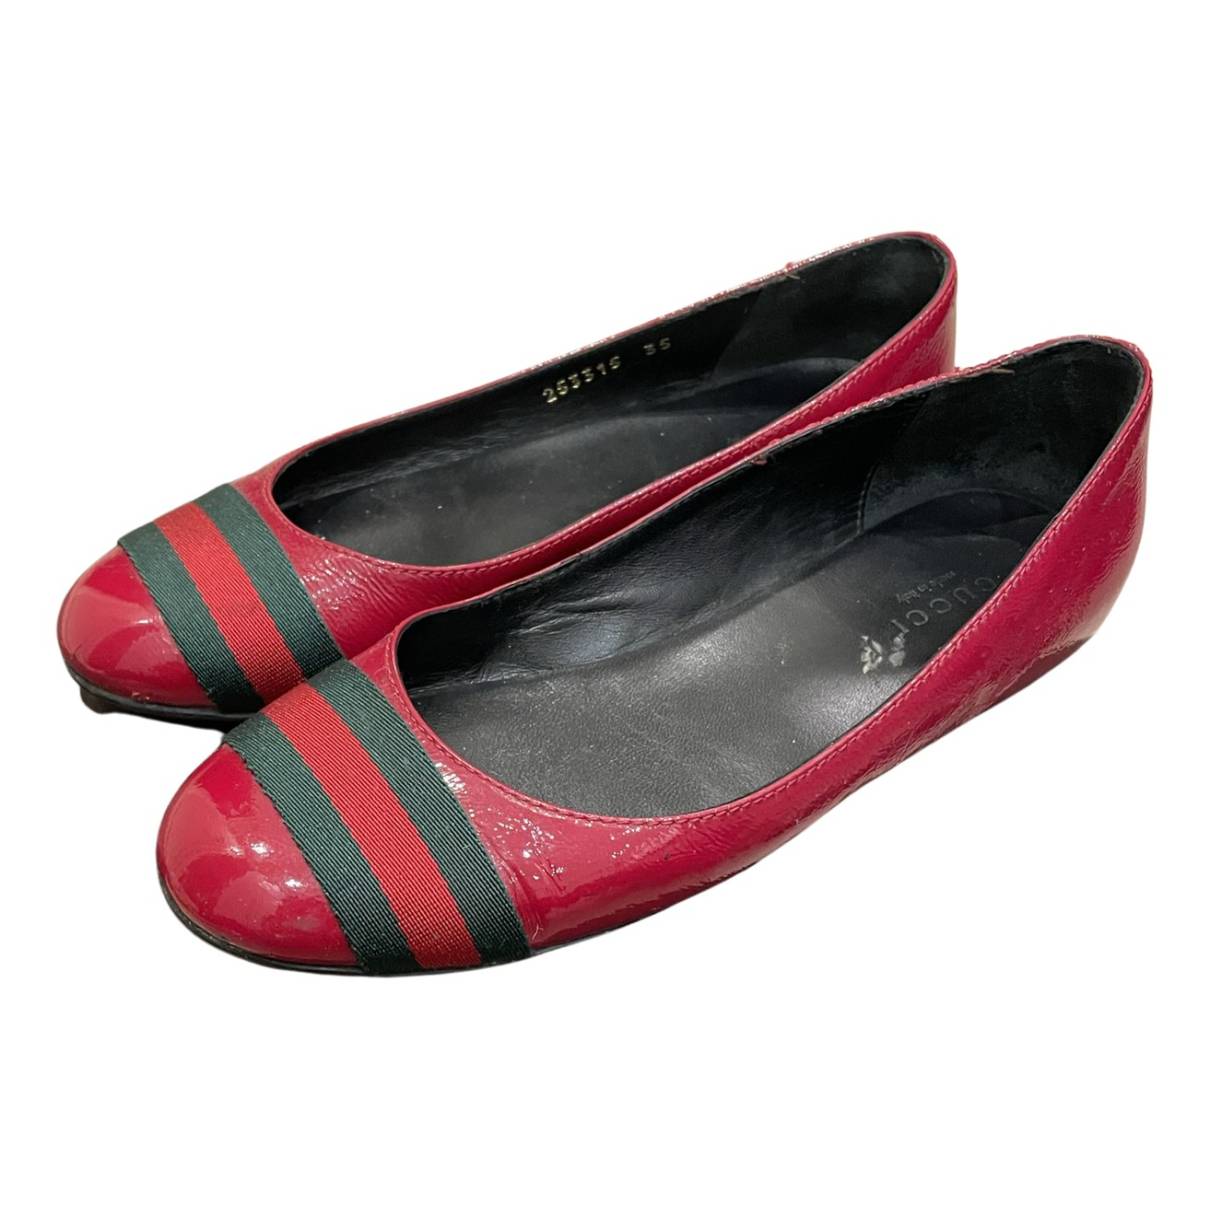 Patent leather ballet flats Gucci Red size 35 EU in Patent leather